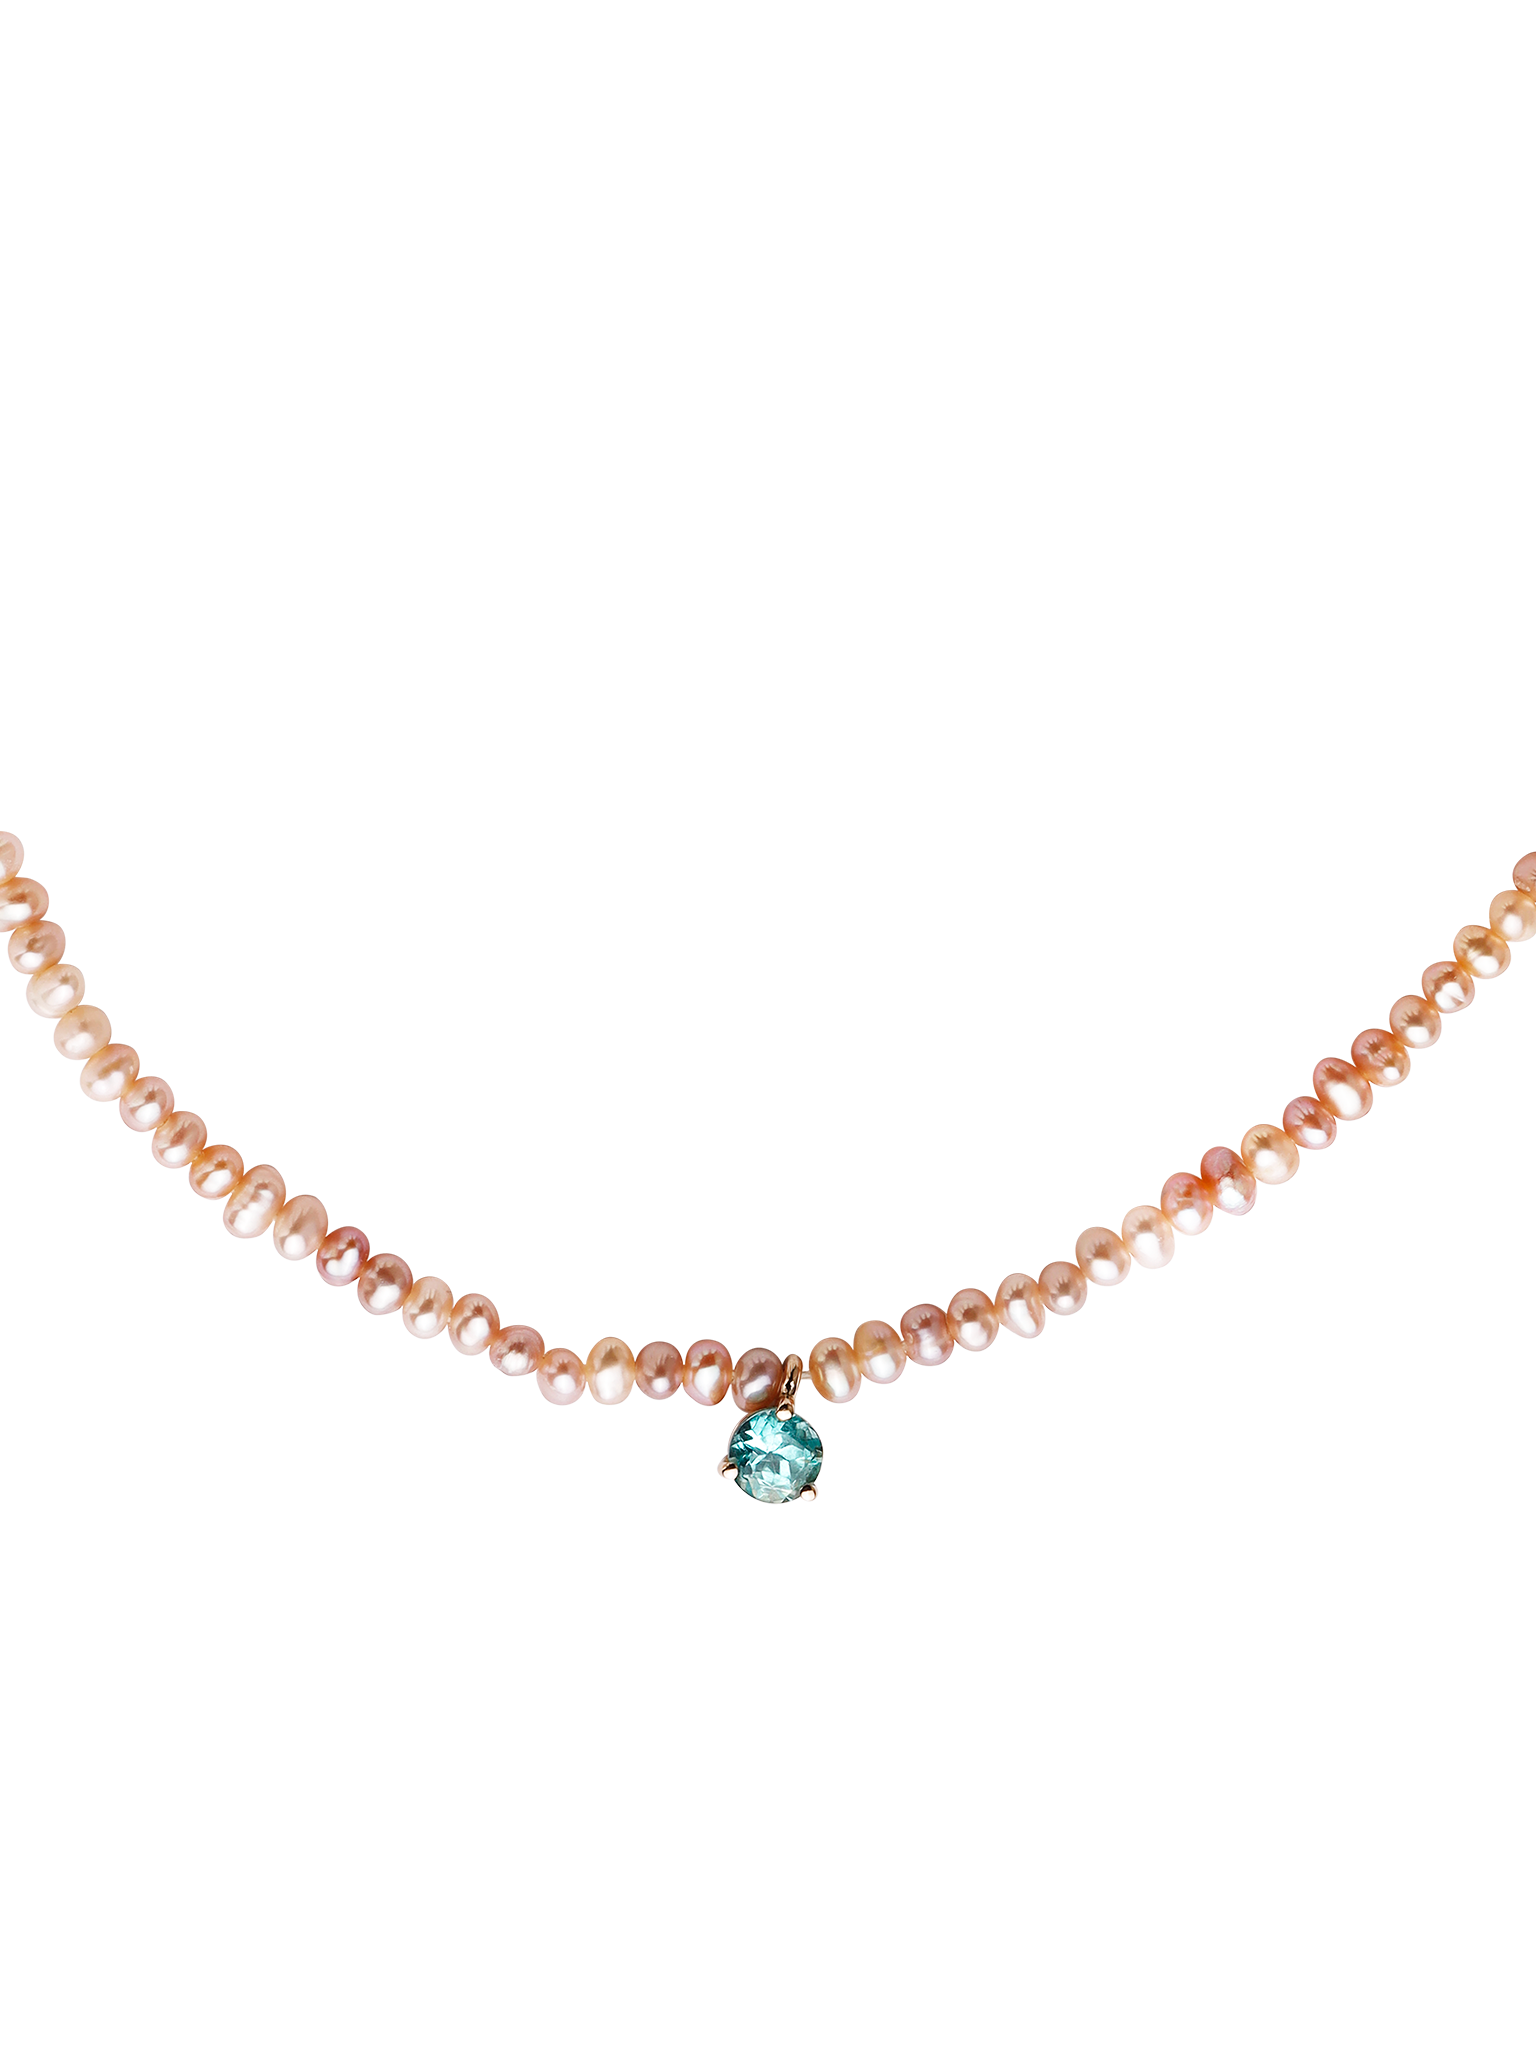 Pacific apatite necklace pink pearls